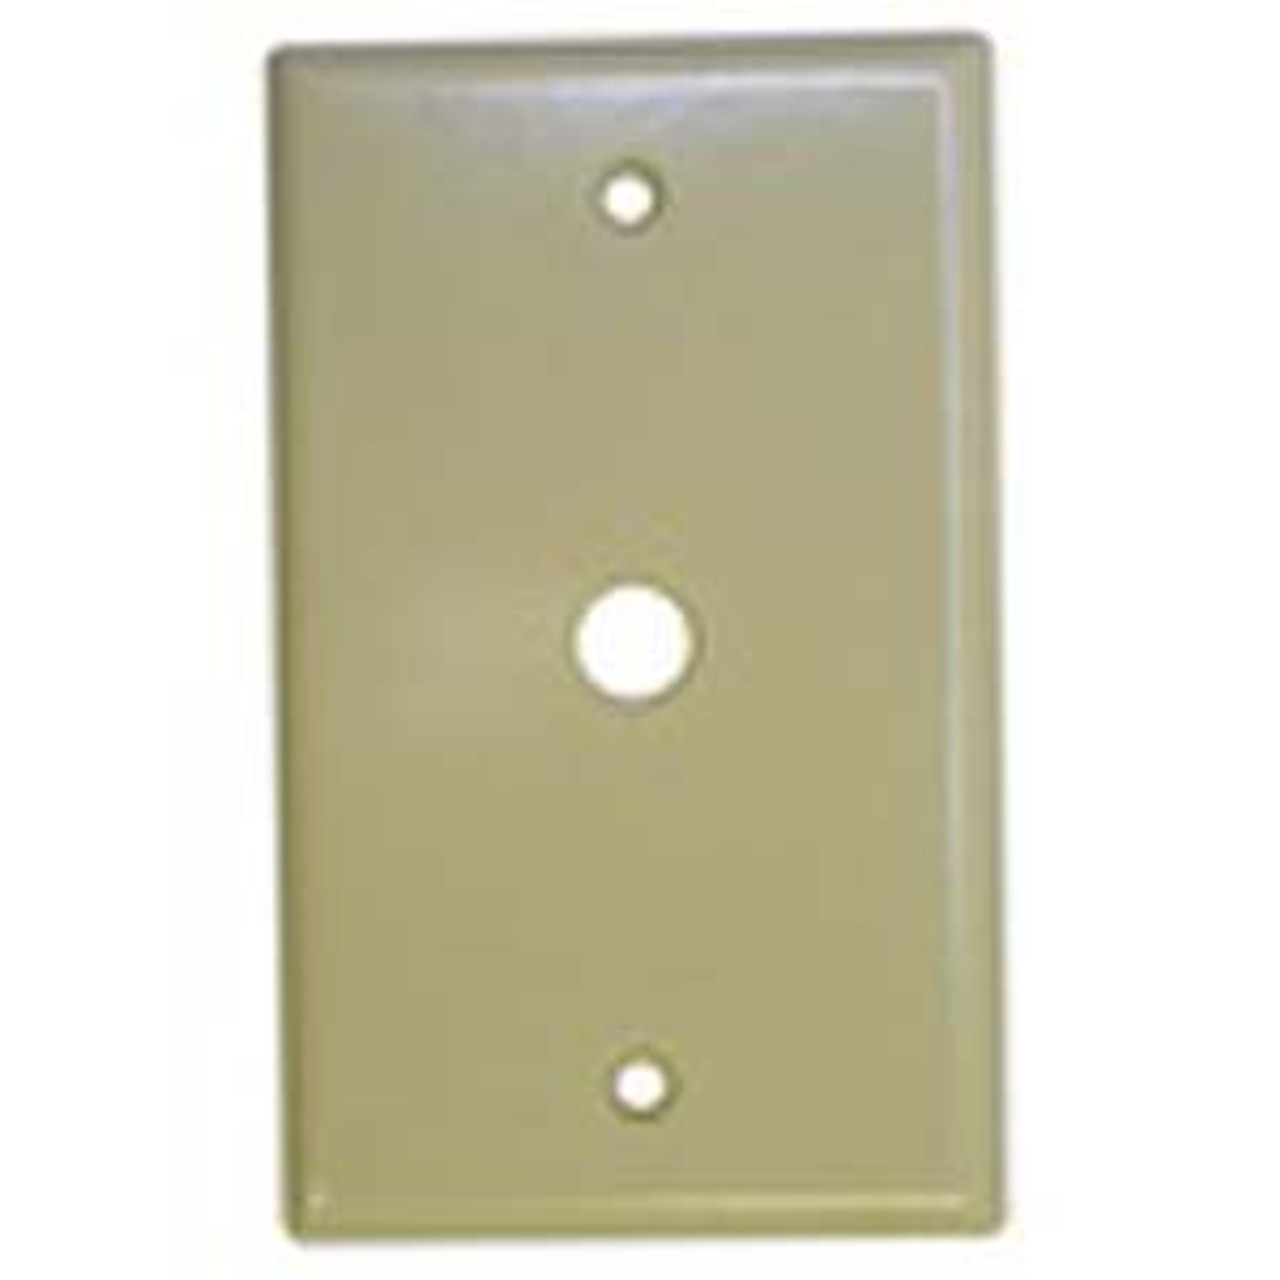 Leviton 80718 - 1-Gang .406 Inch Hole Device Telephone/Cable Wallplate, Standard Size (Strap Mount)